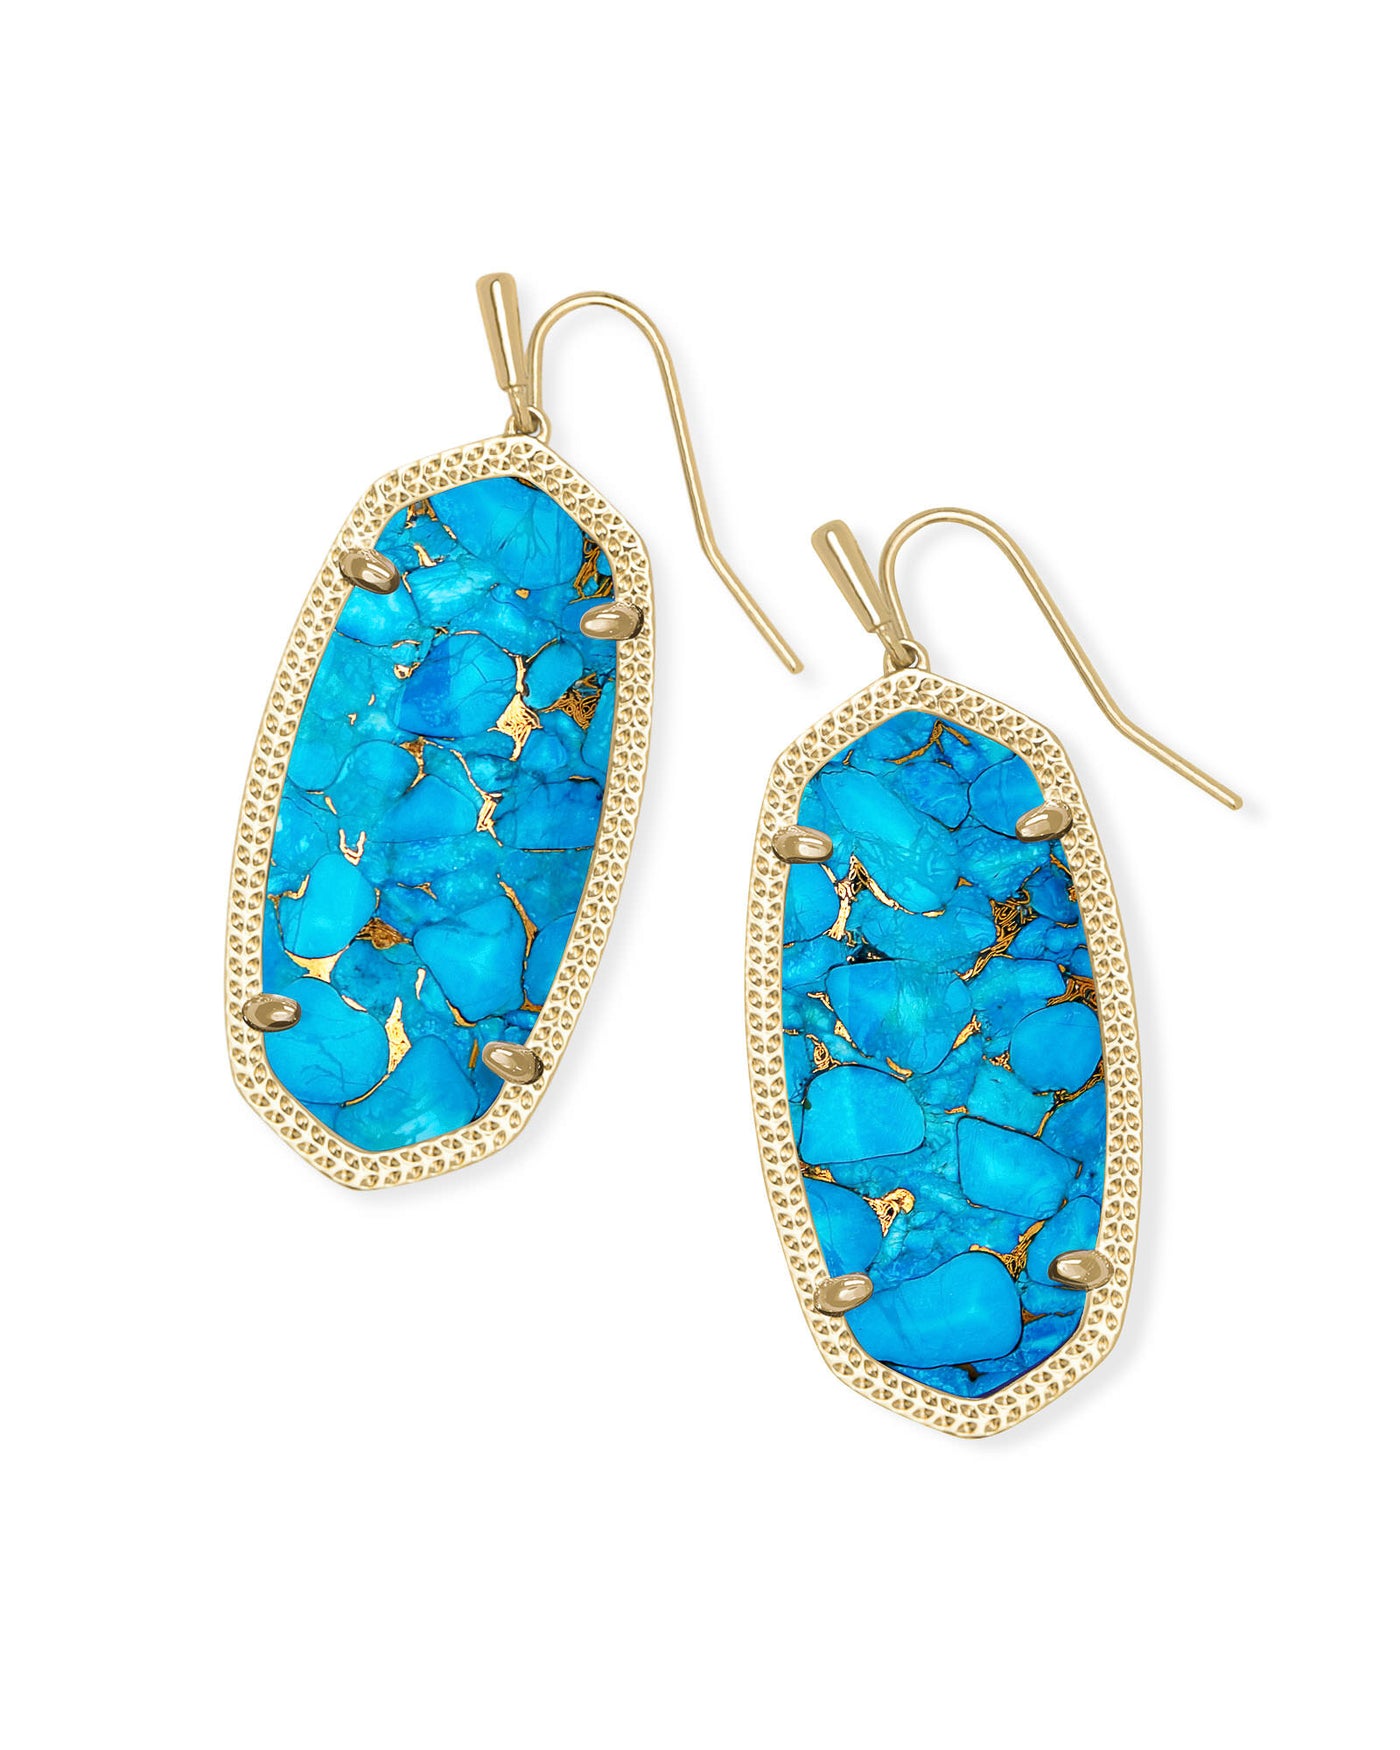 Kendra Scott Elle Drop Earrings Gold Bronze Veined Turquoise-Earrings-Kendra Scott-Market Street Nest, Fashionable Clothing, Shoes and Home Décor Located in Mabank, TX